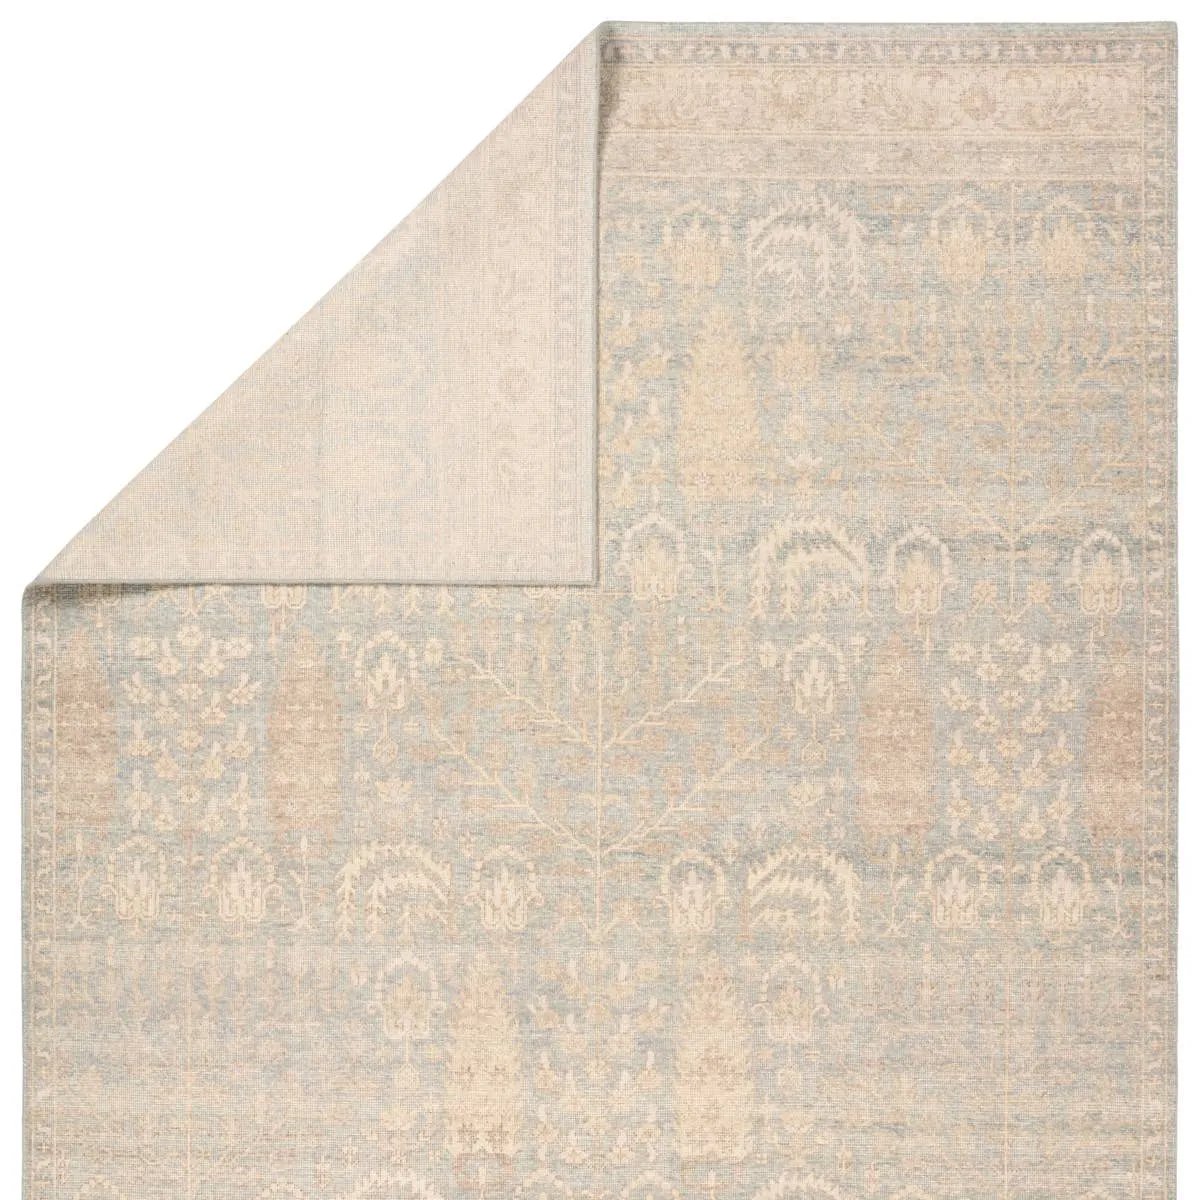 The Onessa Delwyn marries traditional motifs with soft, subdued colorways for the perfect blend of fresh and time-honored style. These hand-knotted wool rugs feature hand-sheared quality with a coveted vintage look. The Delwyn rug features distressed Tree of Life patterns granting added balance and harmony to the centerpiece of a room. Amethyst Home provides interior design, new home construction design consulting, vintage area rugs, and lighting in the Charlotte metro area.